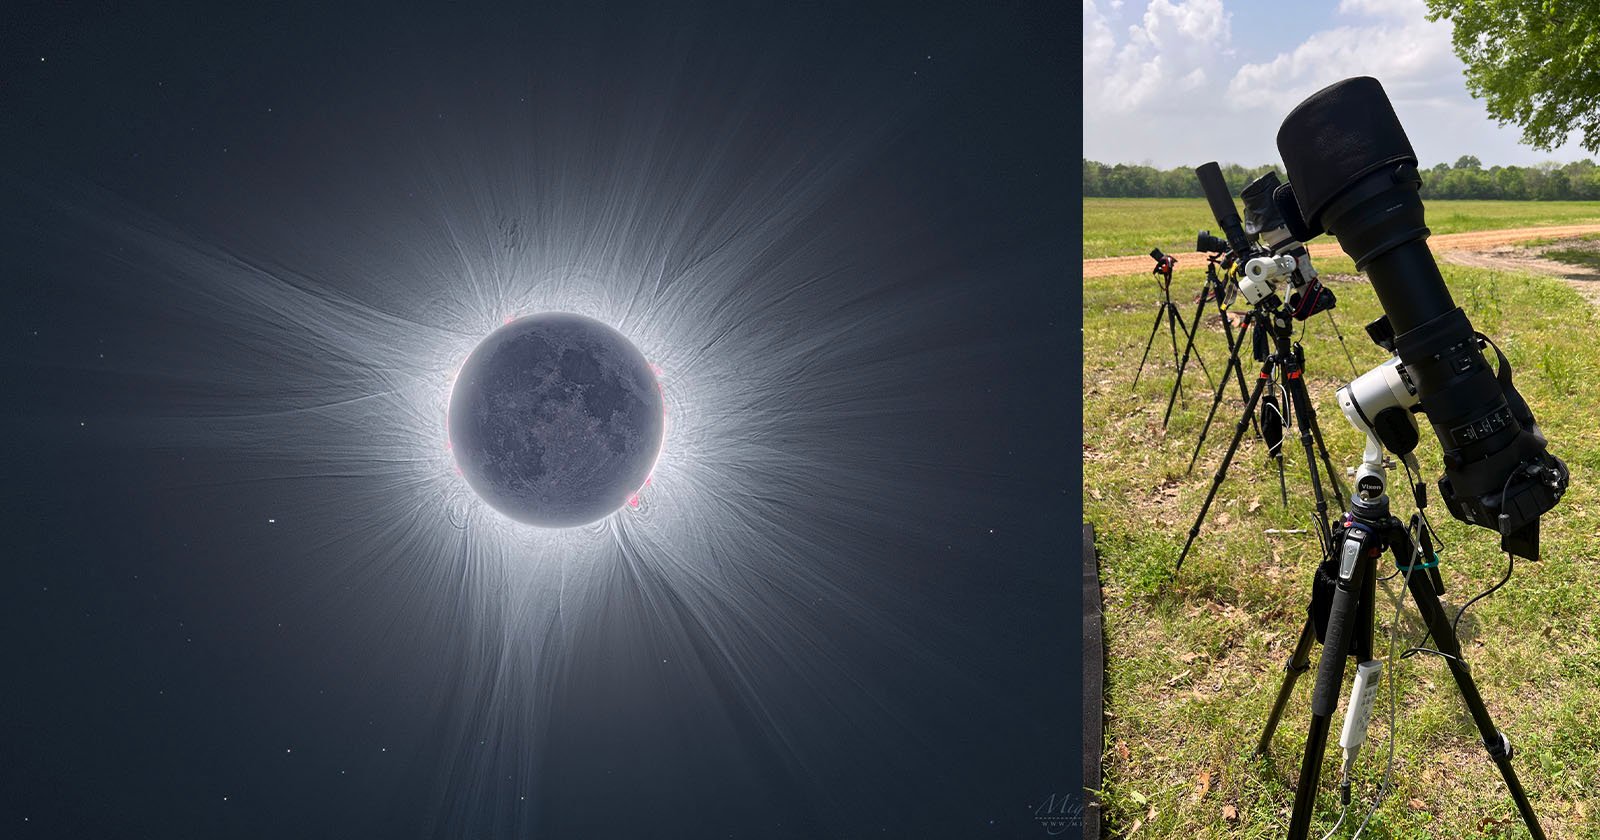  photographer travels from portugal texas stunning eclipse 